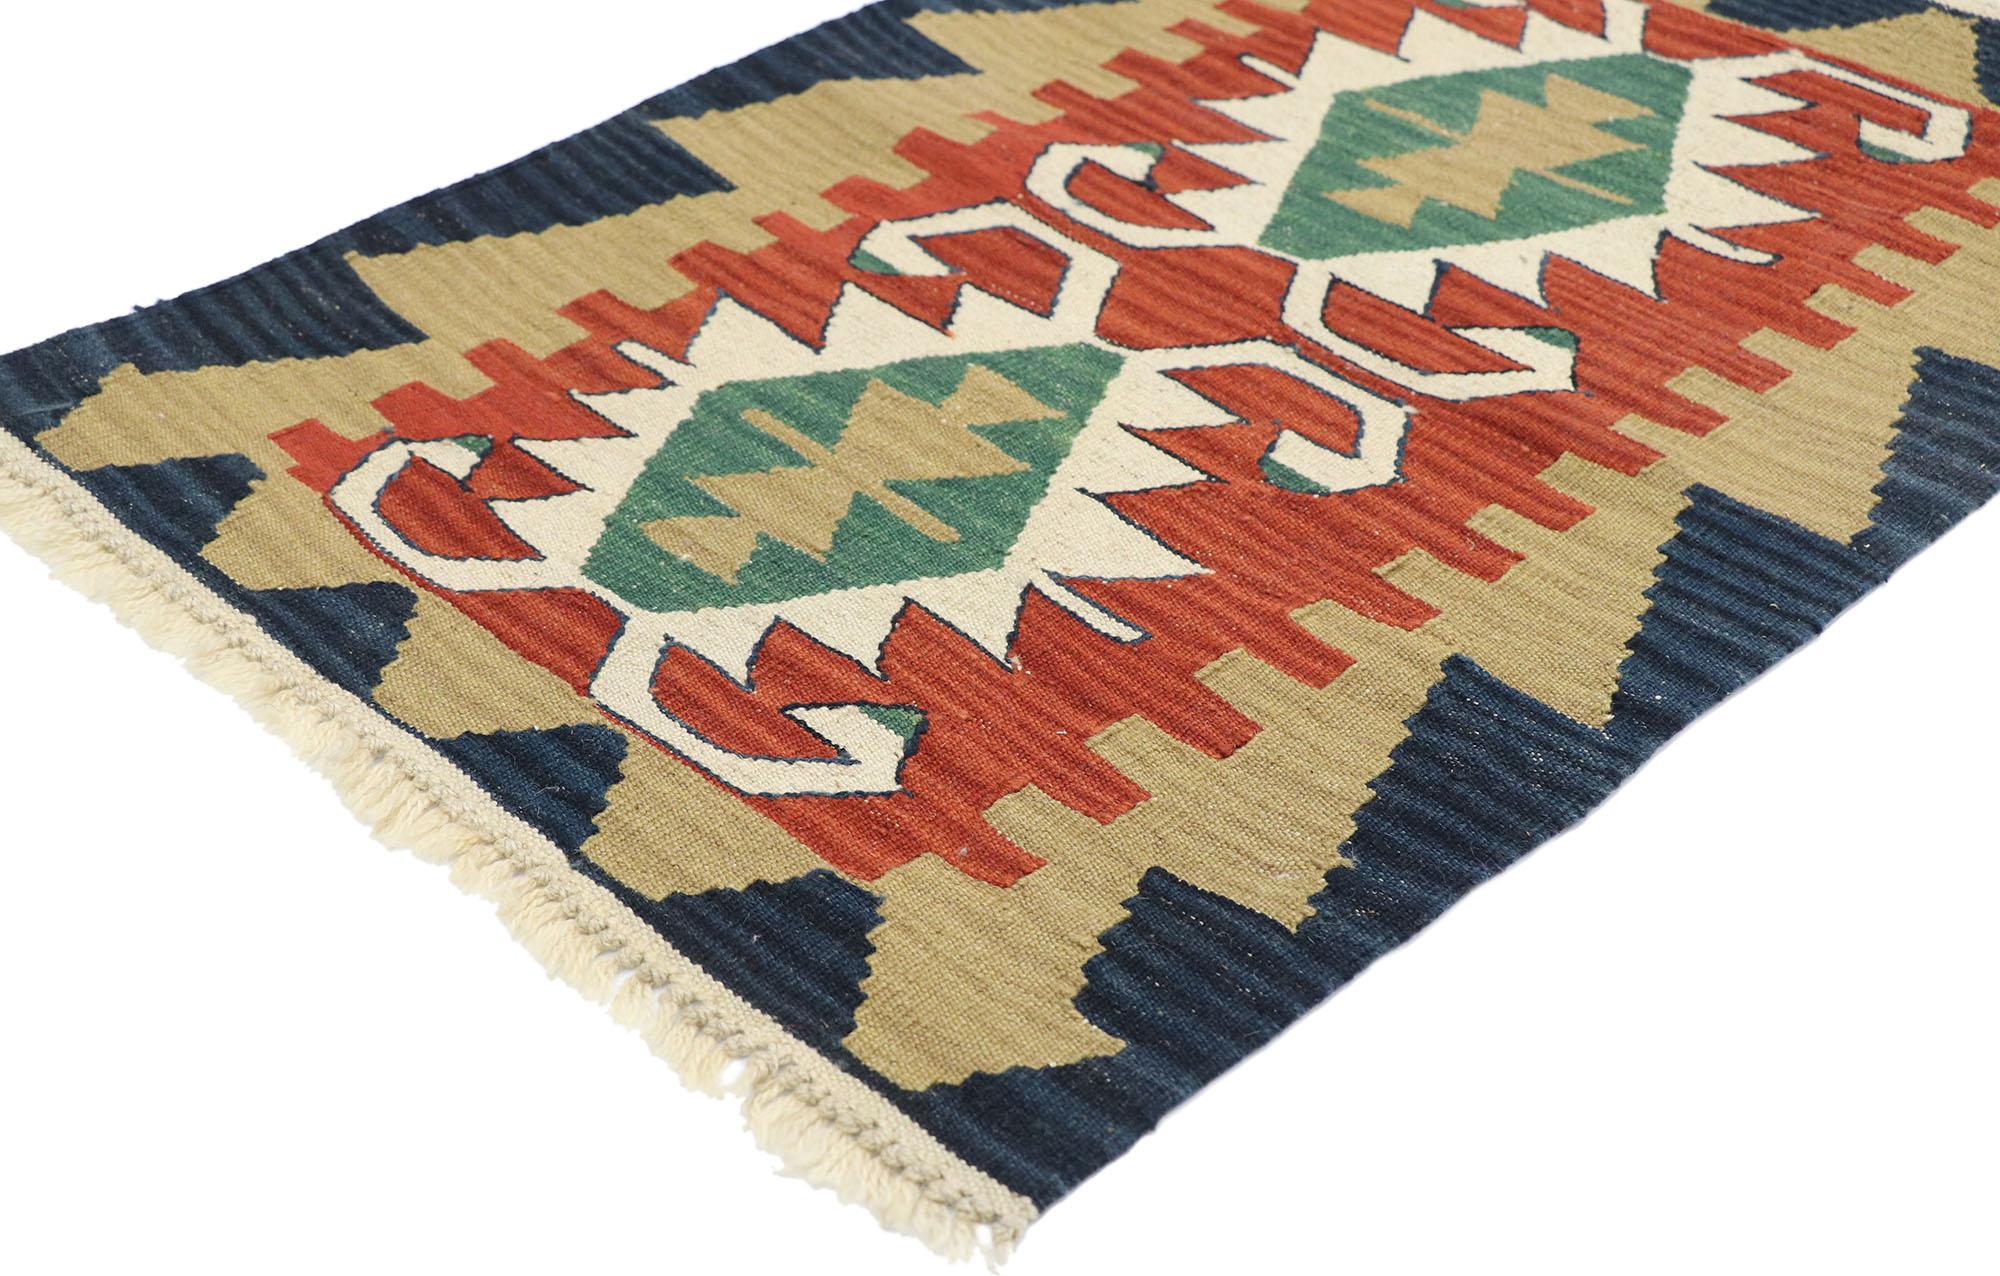 77903, vintage Persian Shiraz Kilim rug with Tribal style. Full of tiny details and a bold expressive design combined with vibrant colors and tribal style, this hand-woven wool vintage Persian Shiraz kilim rug is a captivating vision of woven